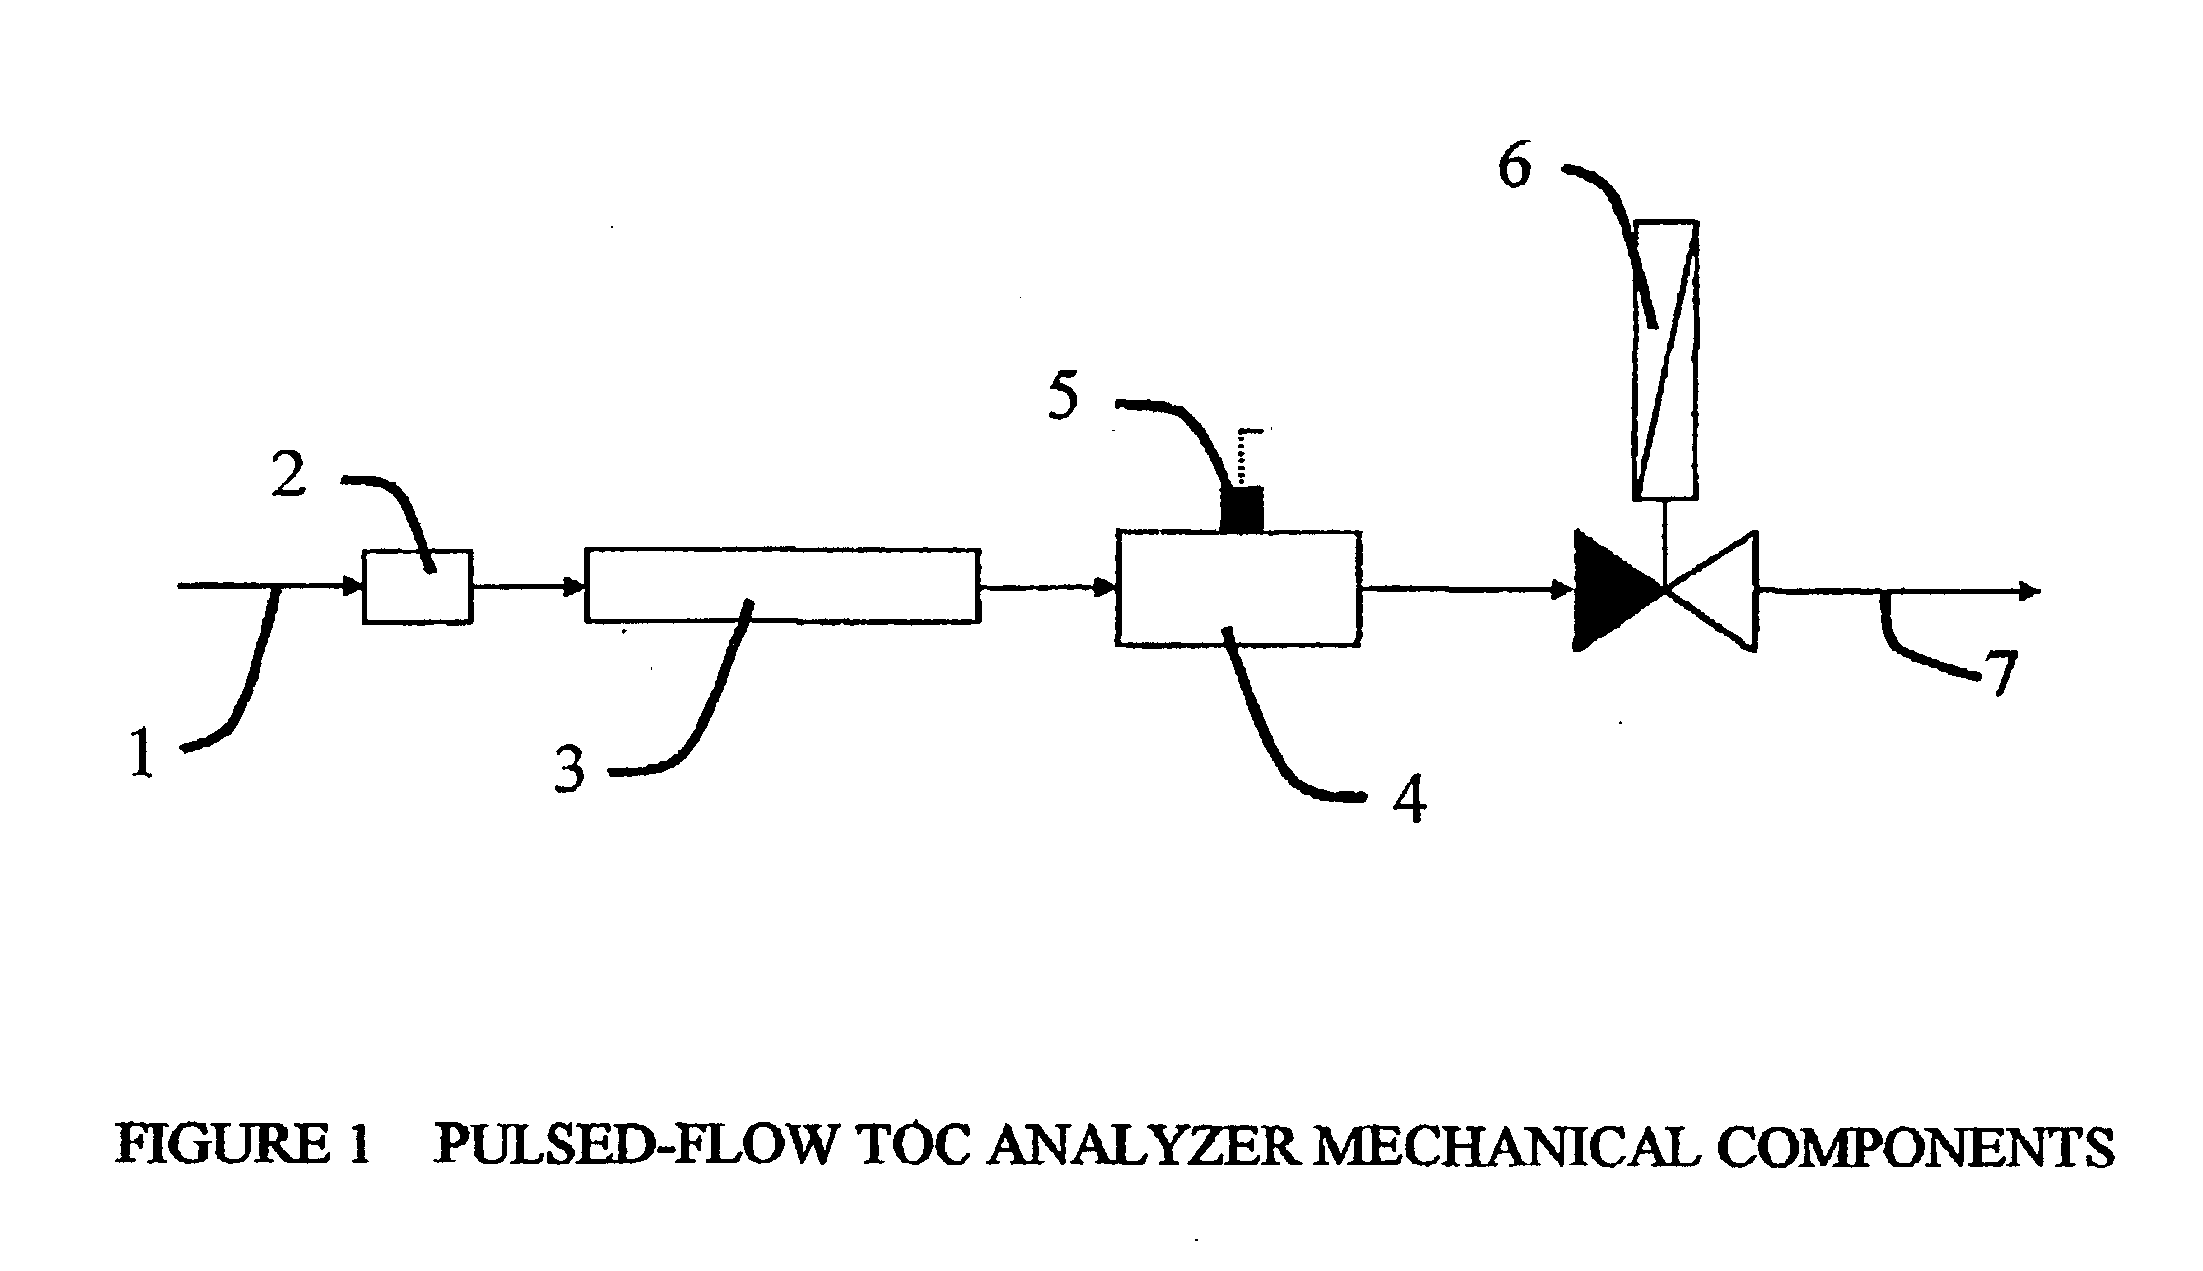 Pulsed-flow total organic carbon analyzer